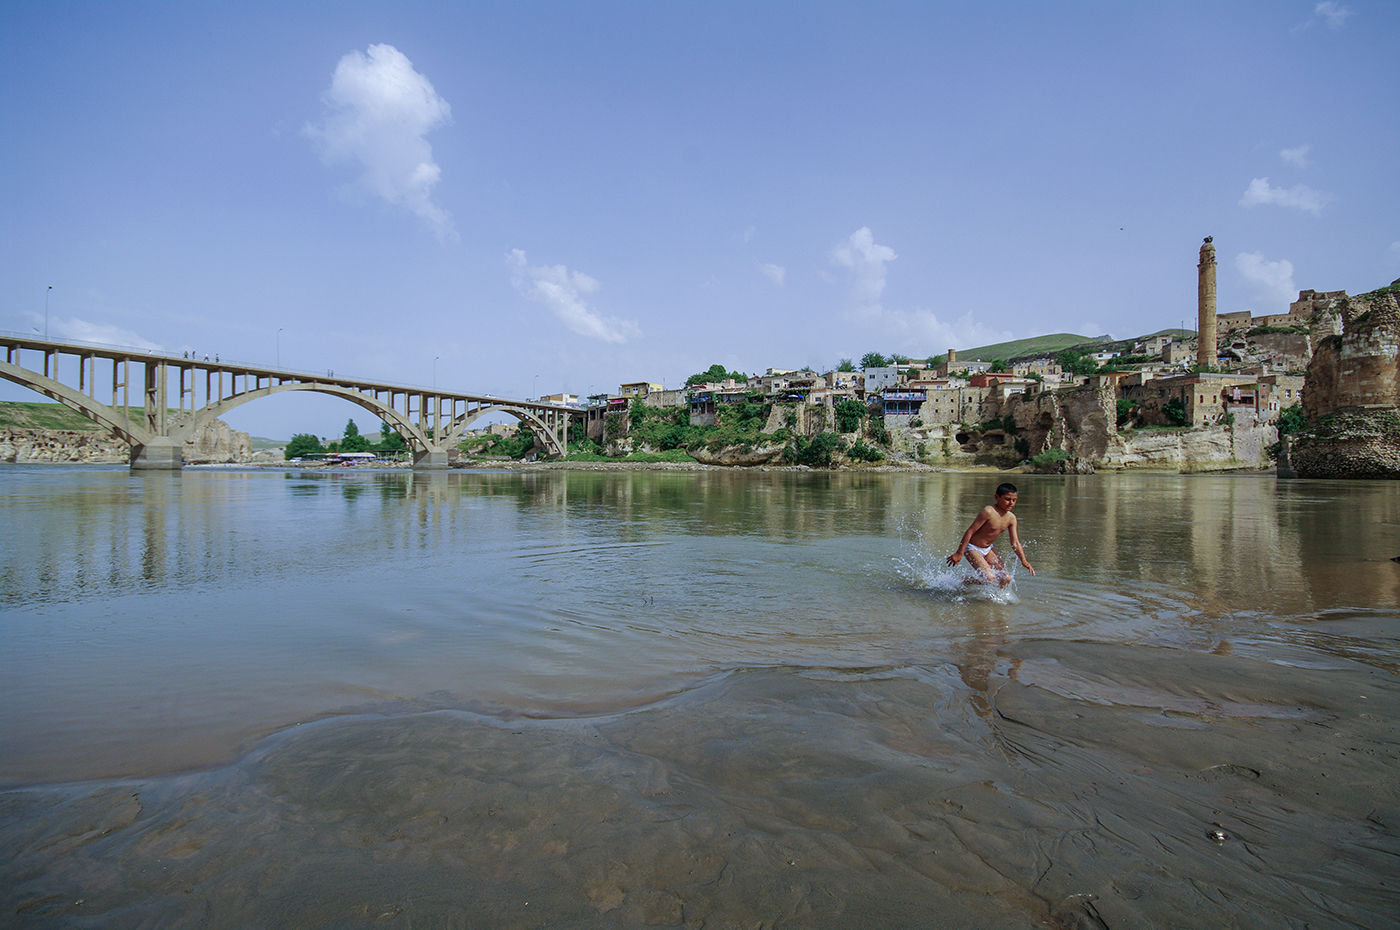 A child run in the water in Hasankeyf, an ancient city with roots going back 10,000 years and located along the Tigris (Dicle) River in south-east Turkey